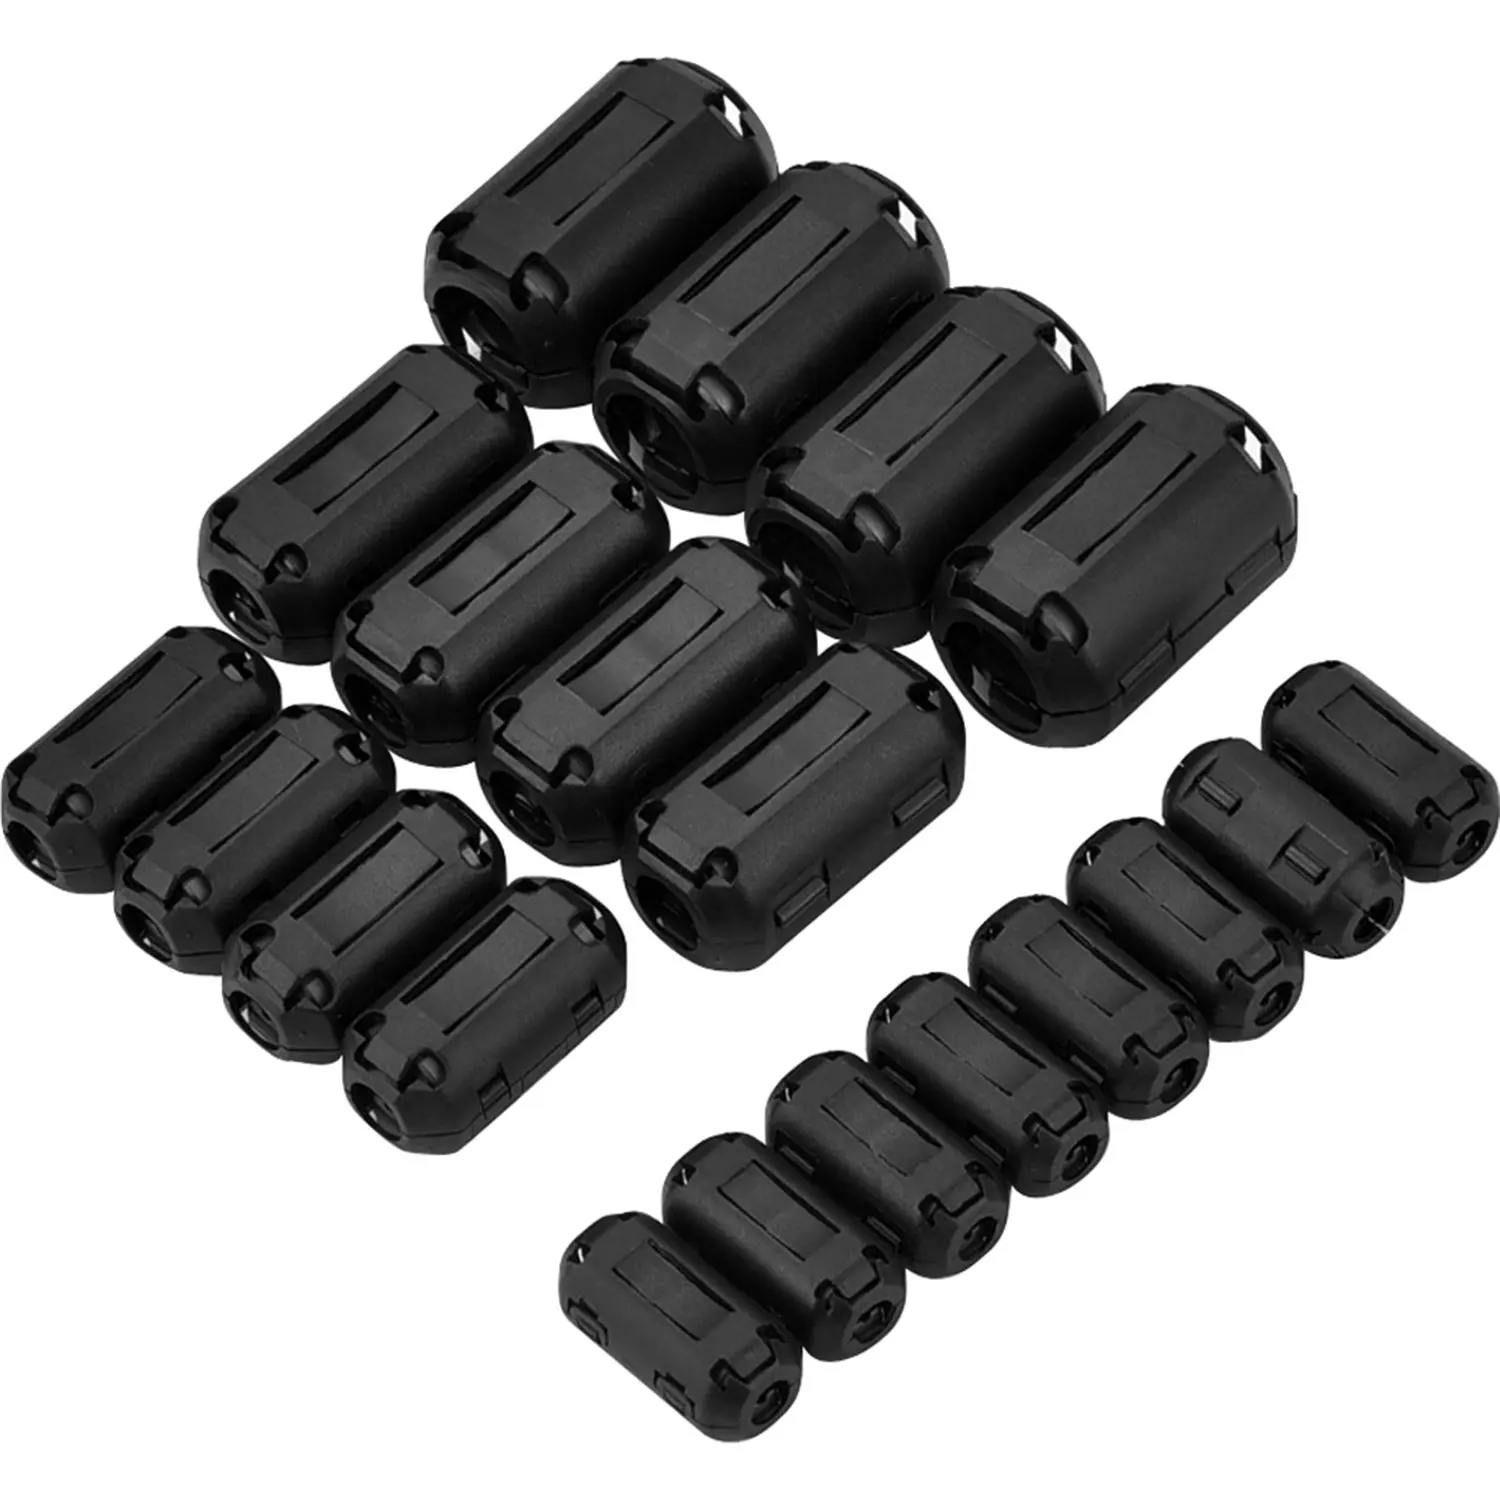 IEUYO Clip-on Ferrite Ring Cores EMI RFI Signal Noise Filter Noise Suppressor for HDMI USB Power Cable Diameter 7mm/12PCS 